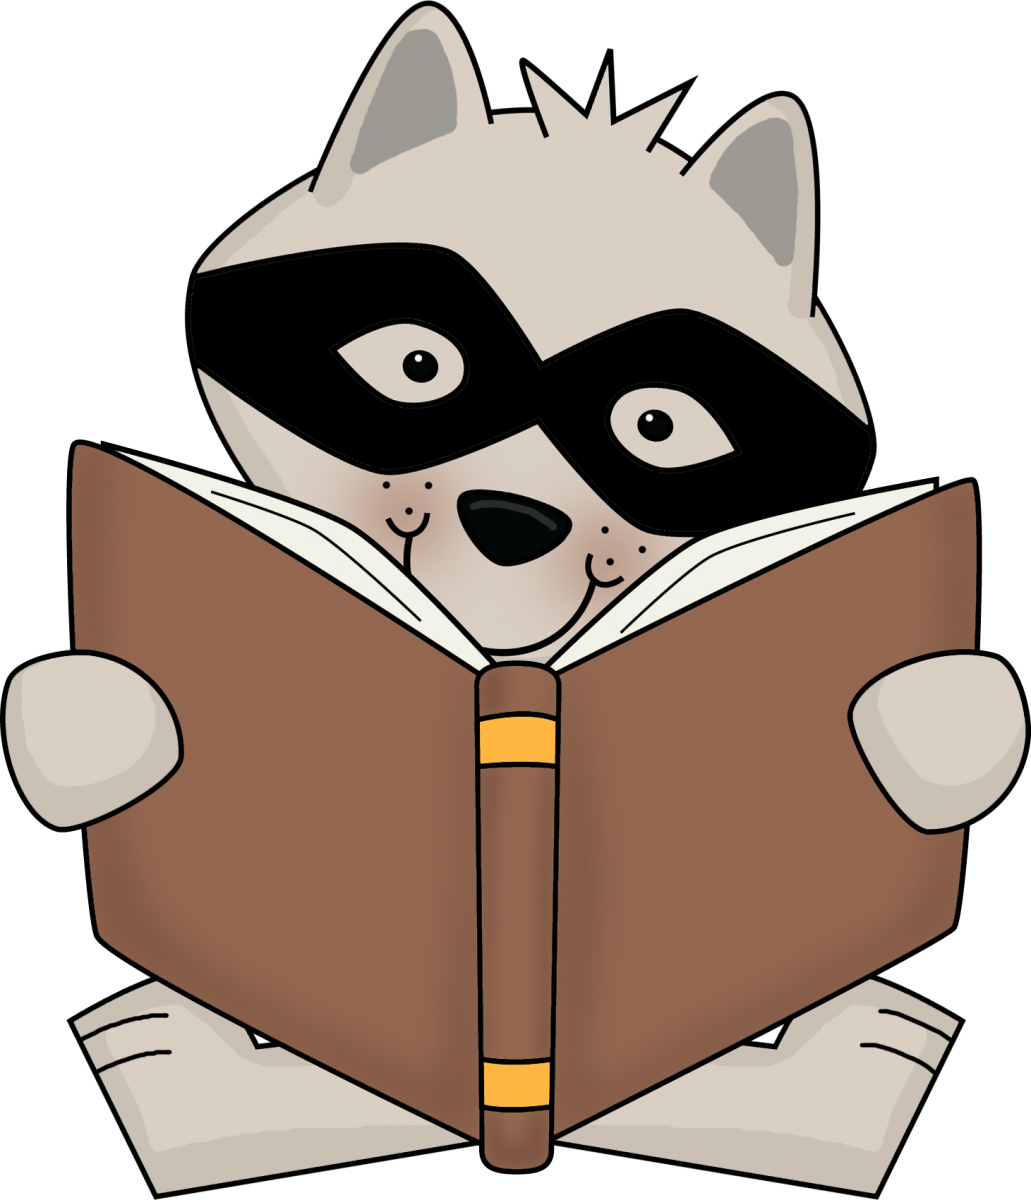 Read To Someone Daily 5   Clipart Panda   Free Clipart Images